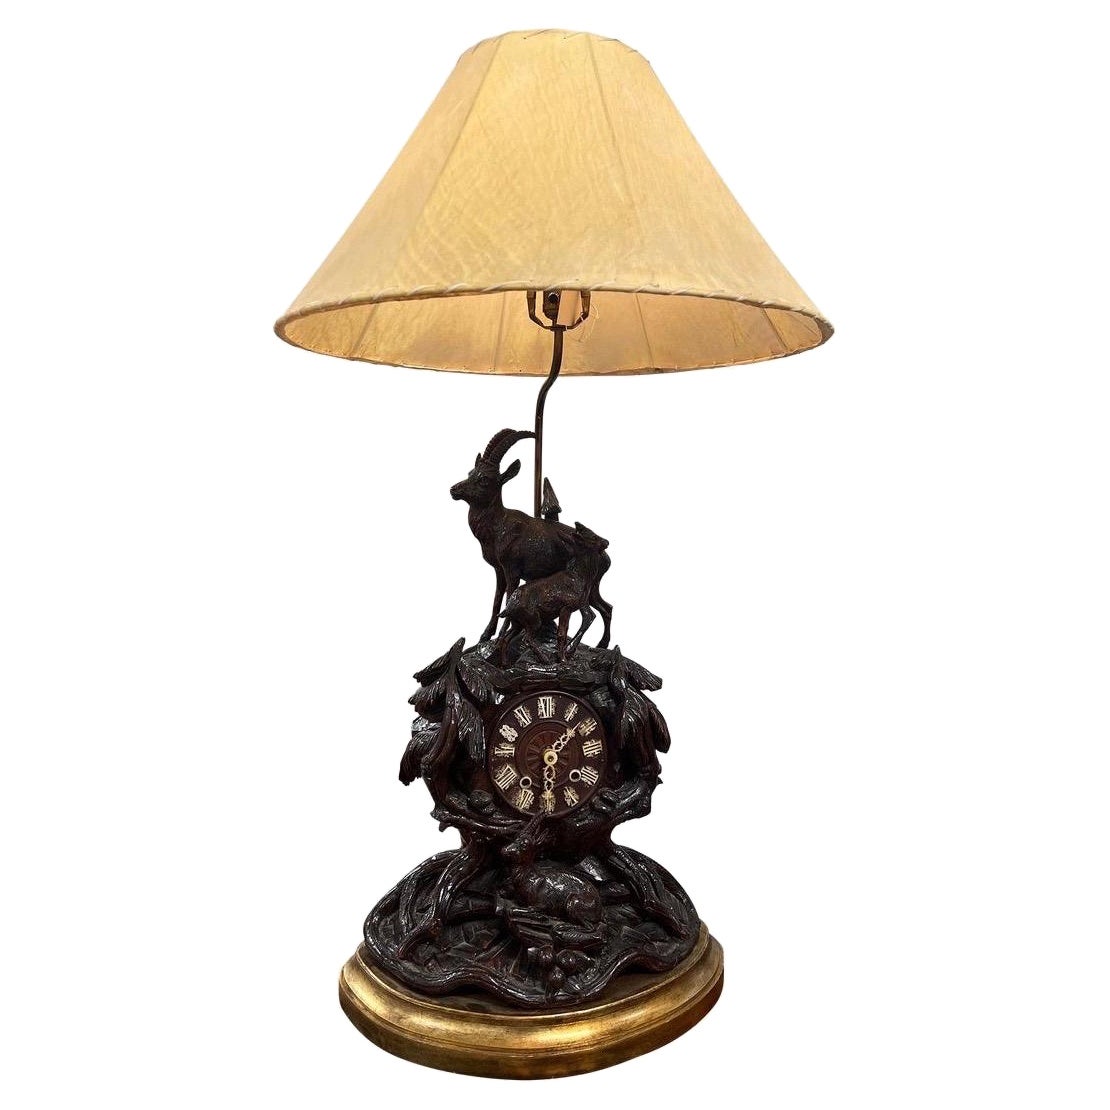 19th Century German Black Forest Carved Clock Mounted Lamp with Cowhide Shade